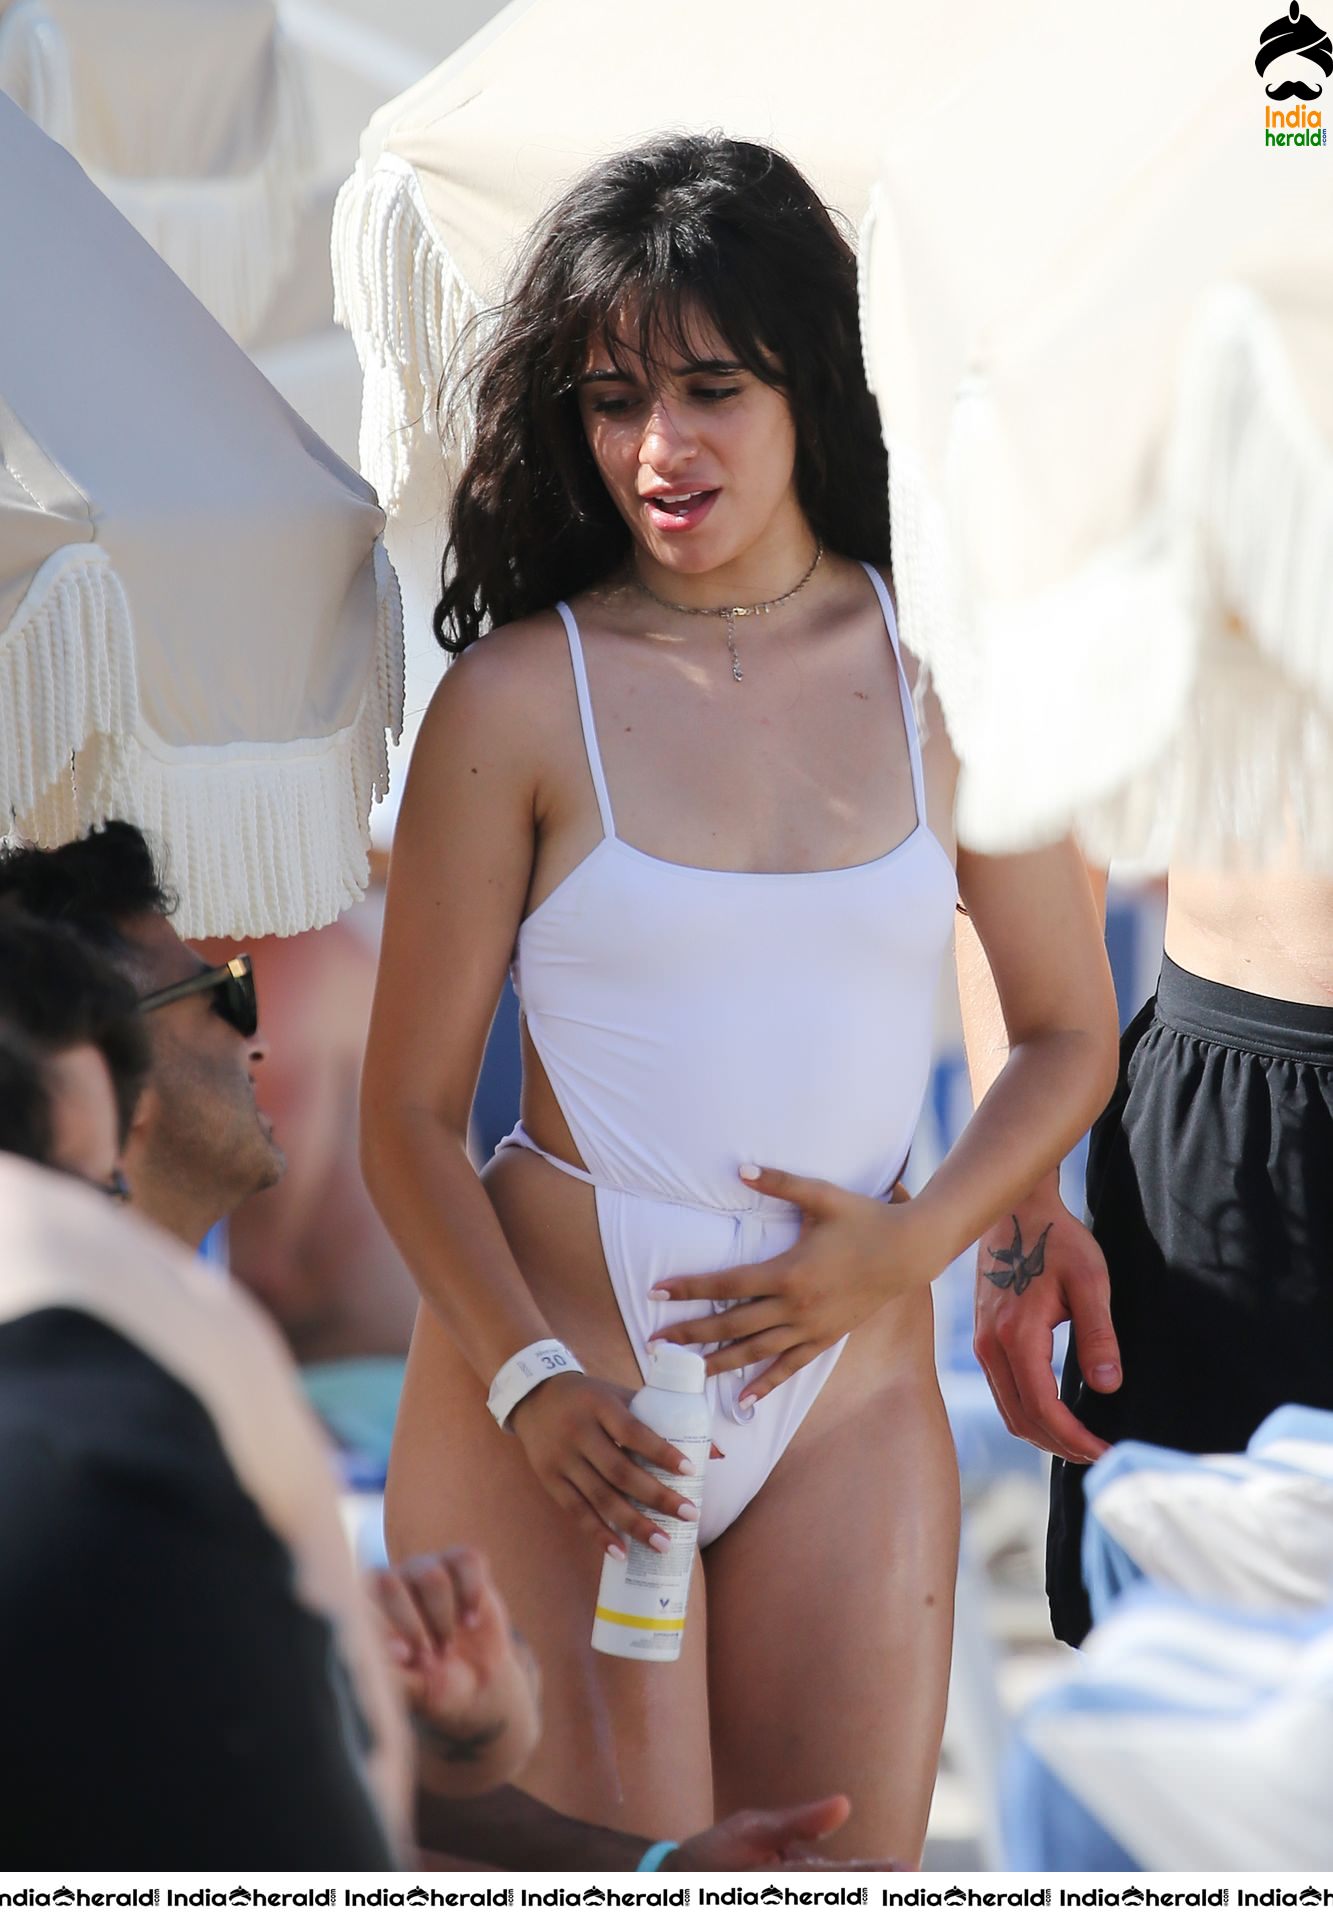 Camila Cabello and Shawn Mendes at a Beach in Miami Set 2